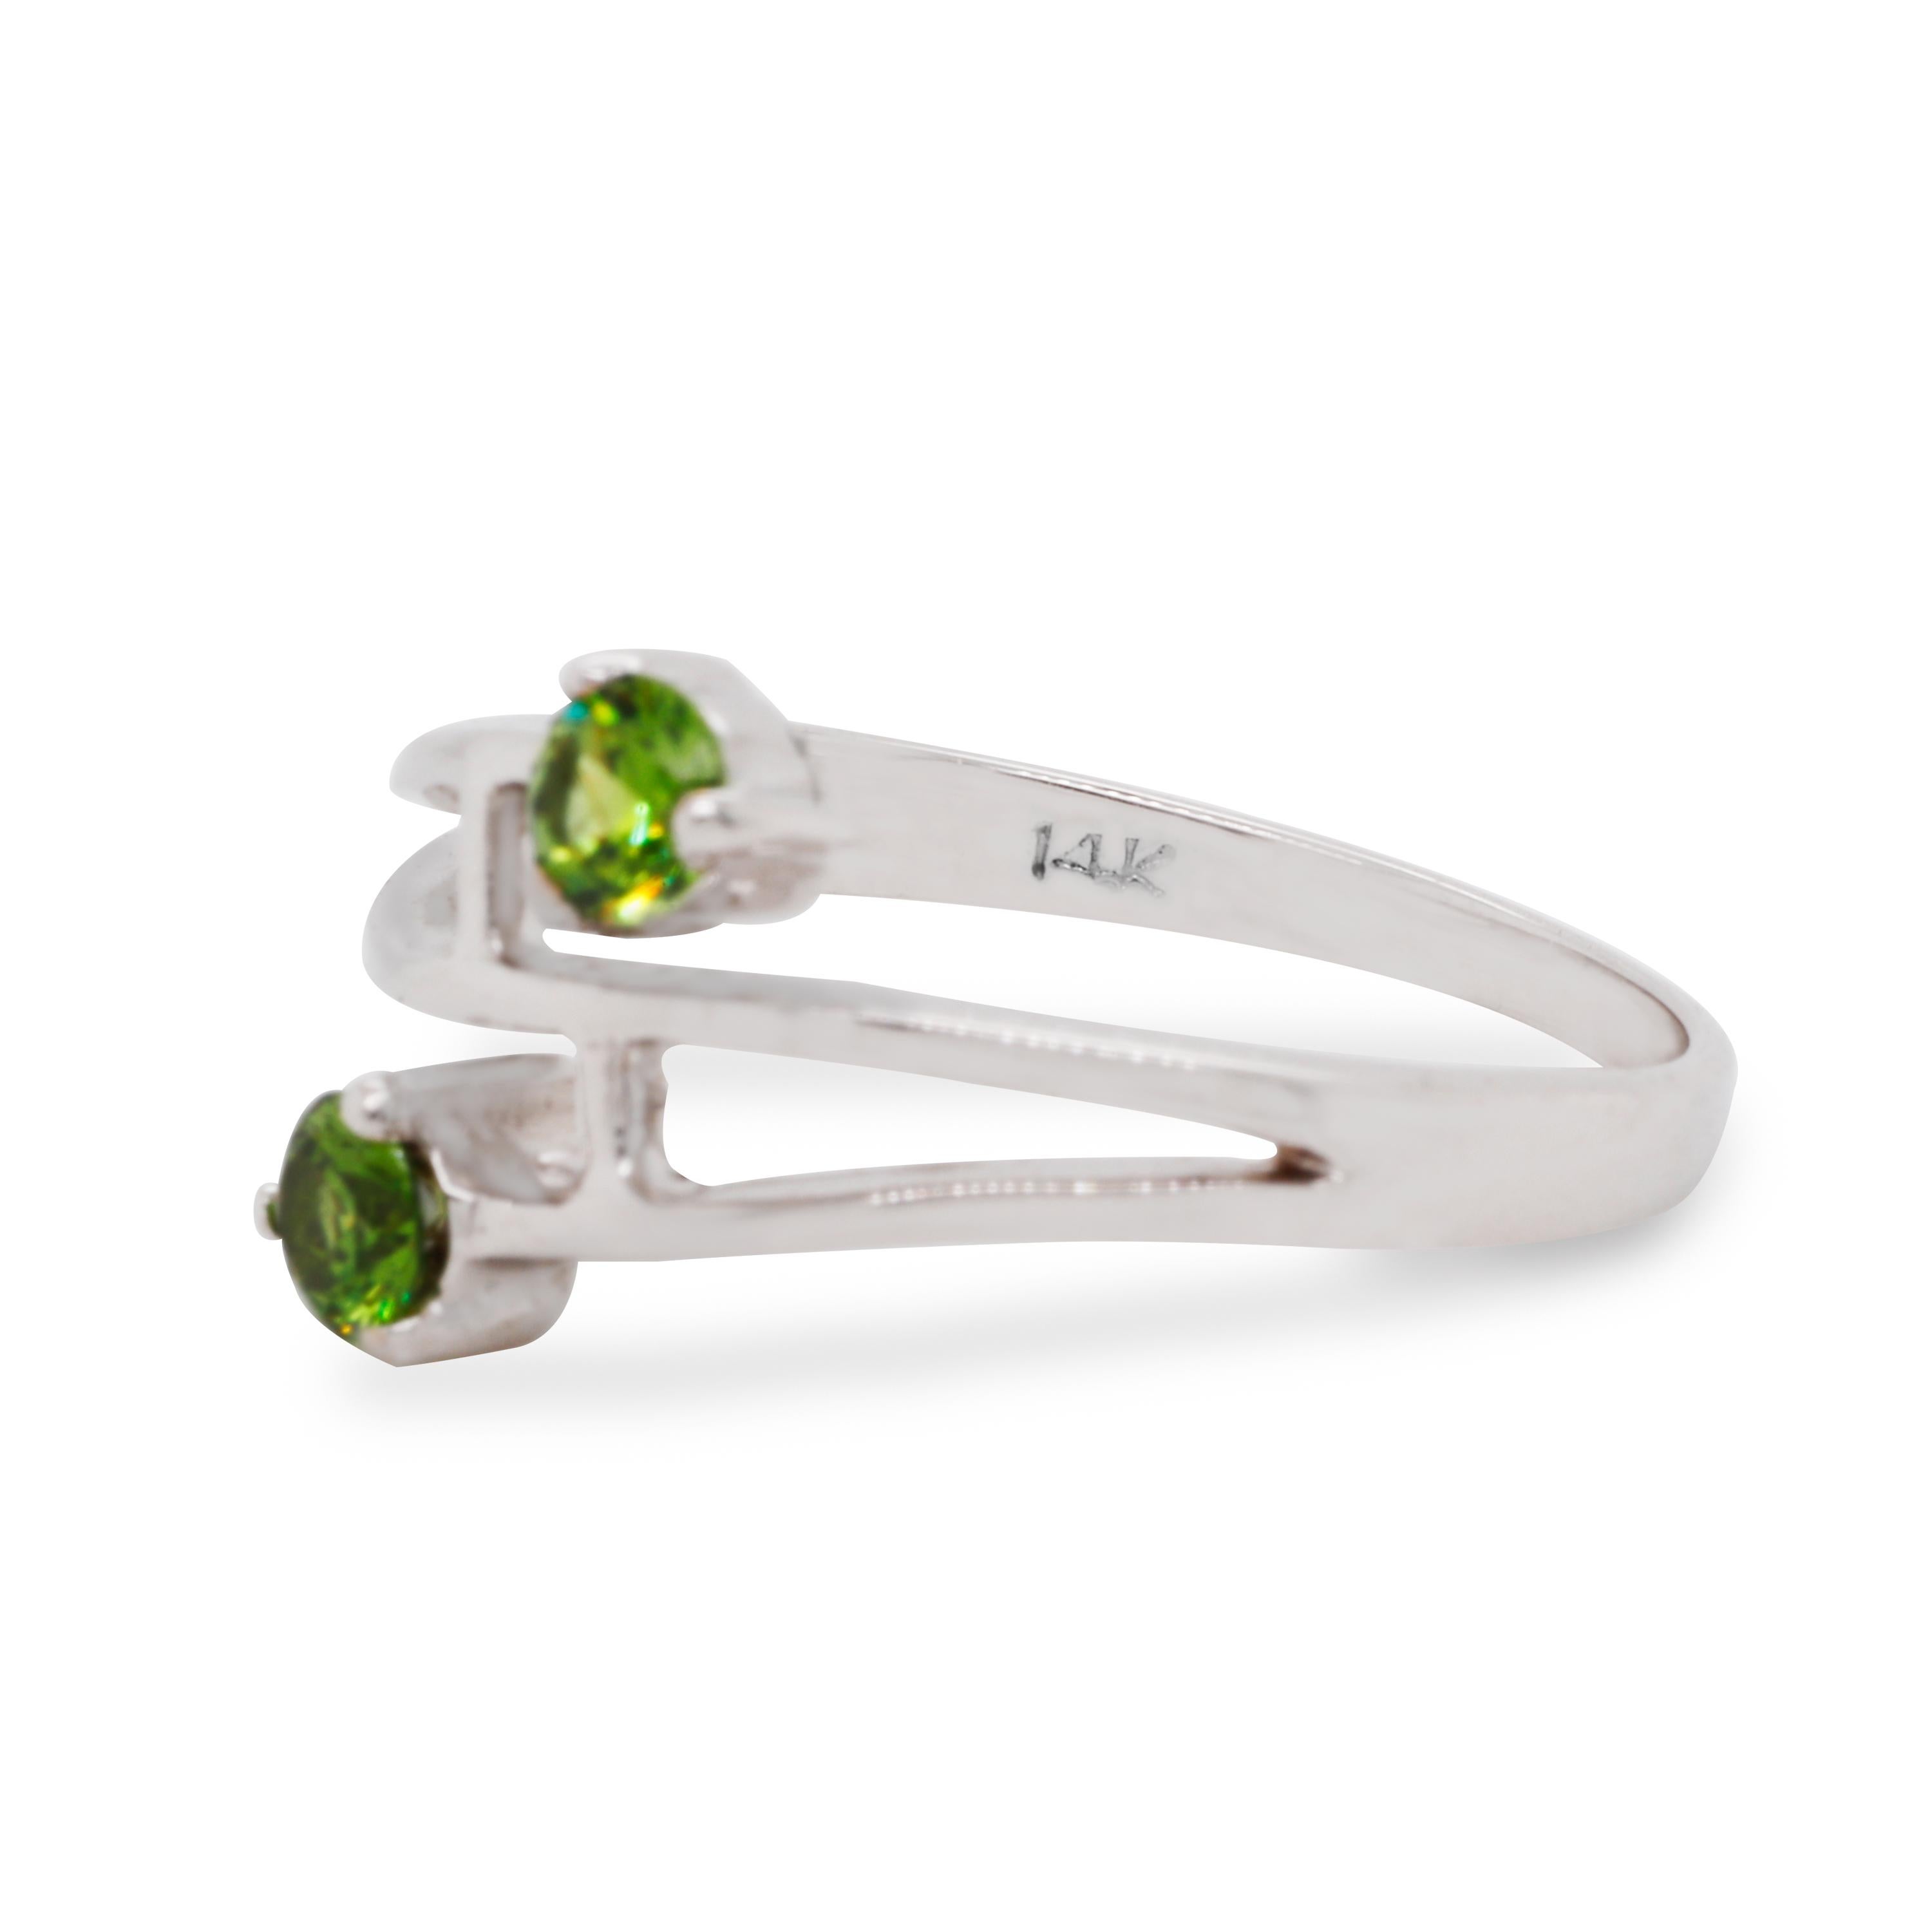 When one is not enough!
Two Russian Demantoids are pretty impressive. They have amazing fire and adorable green color! 
Use this ring anytime you need to add elegant style to your outfit.

Stones: Russian Demantoid
Weight  ~ 0.45 ct

Total weight: